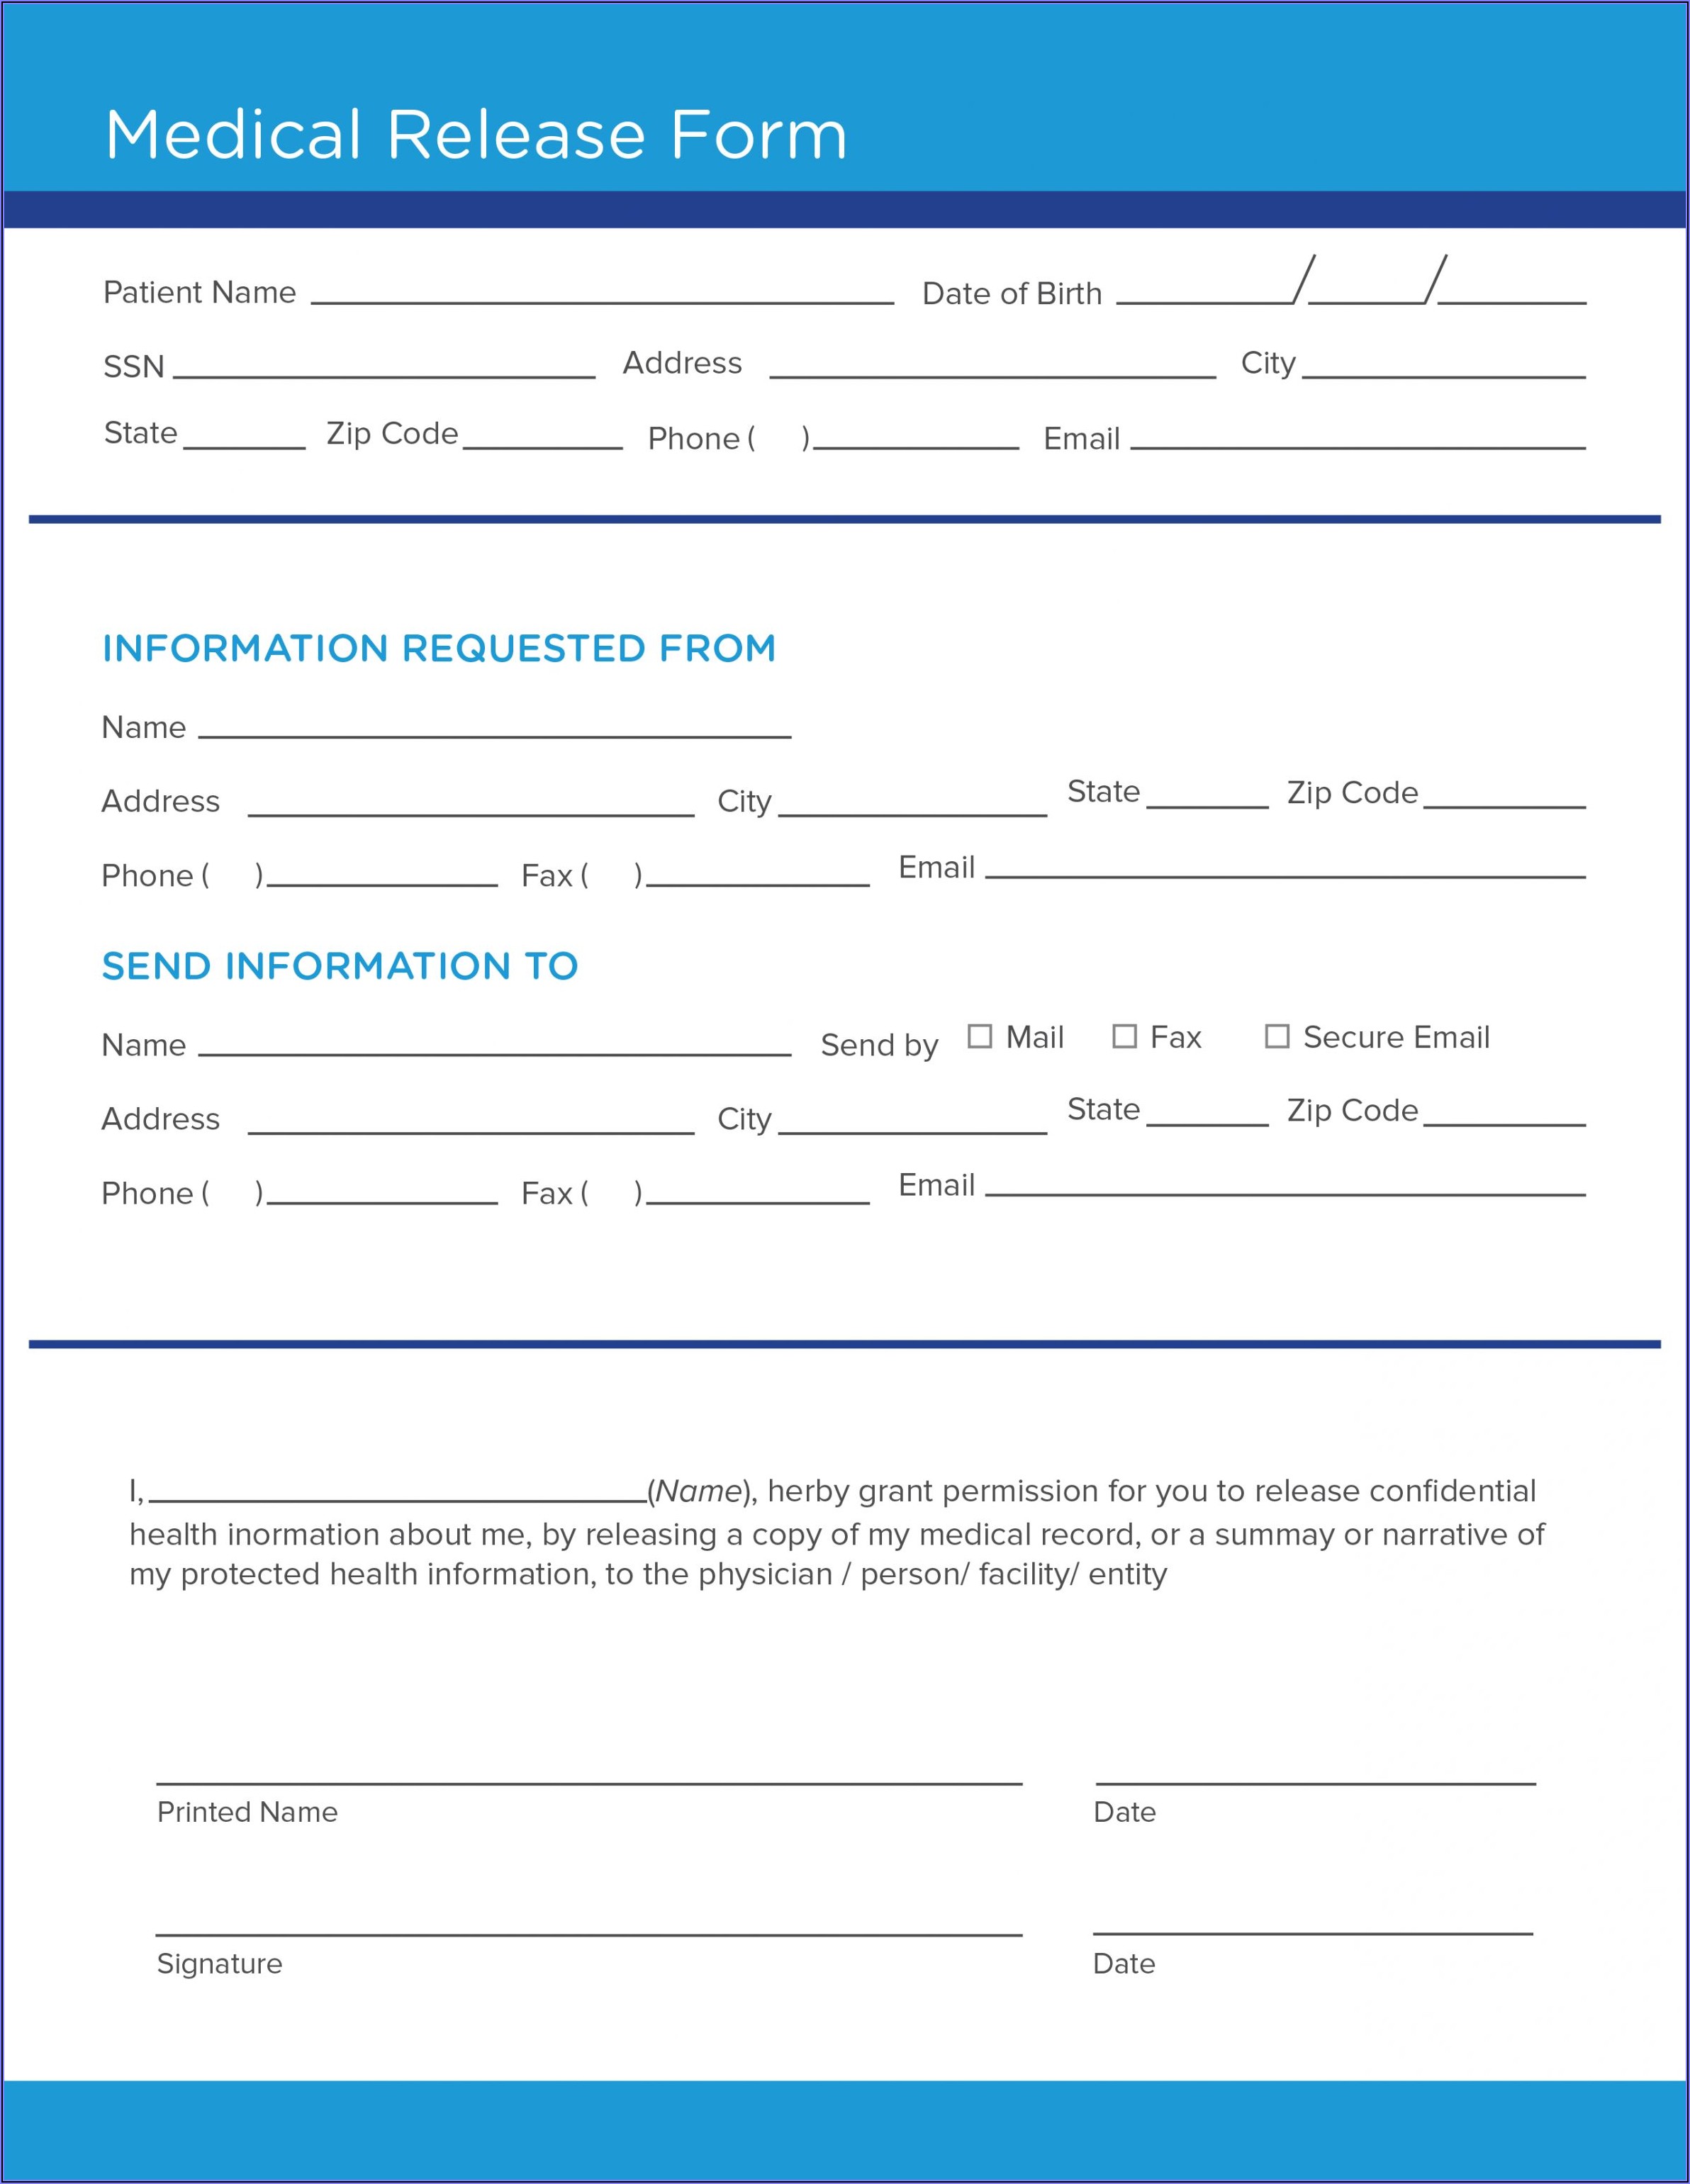 Medical Release Form Template For Grandparents